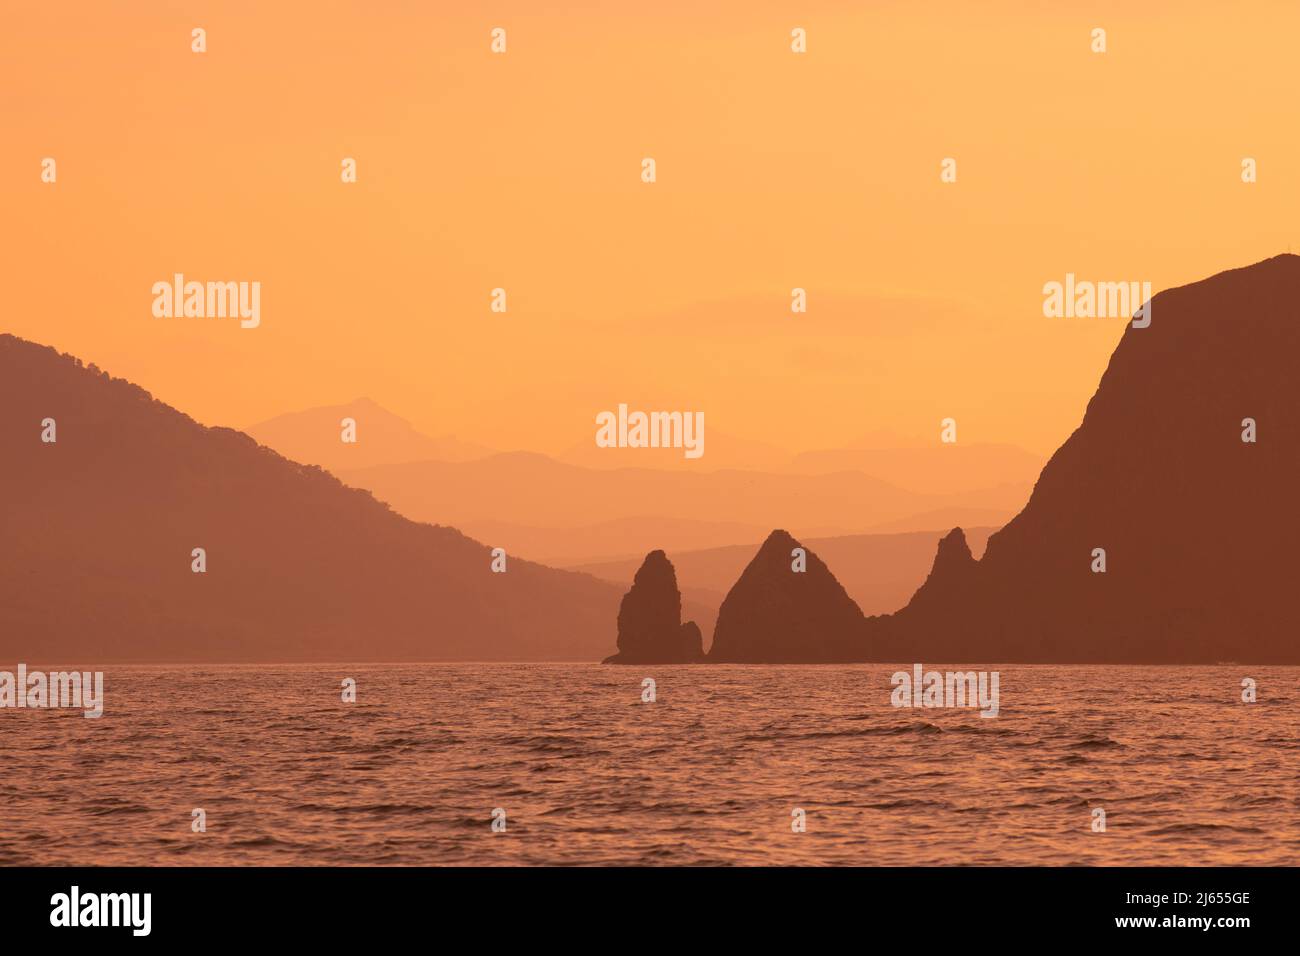 Orange or yellow sunset mountains and sea natural landscape background Stock Photo